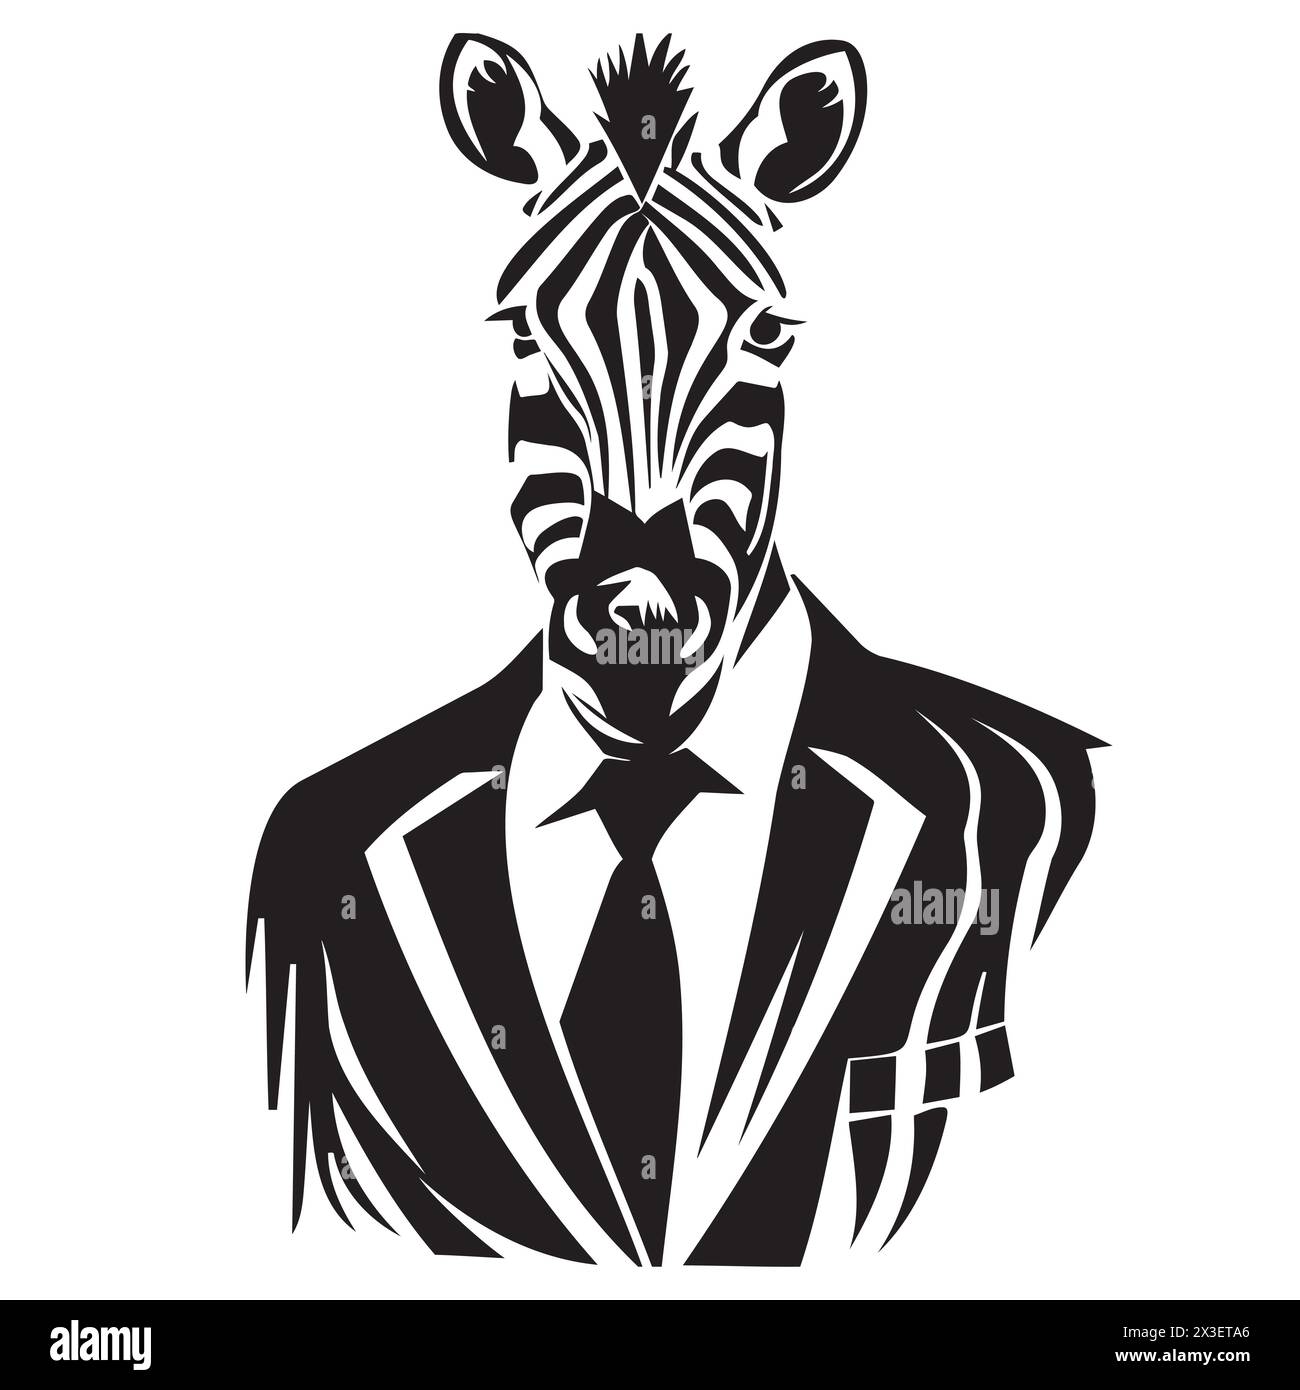 A zebra in a suit and tie with line art and stencil details Stock Vector